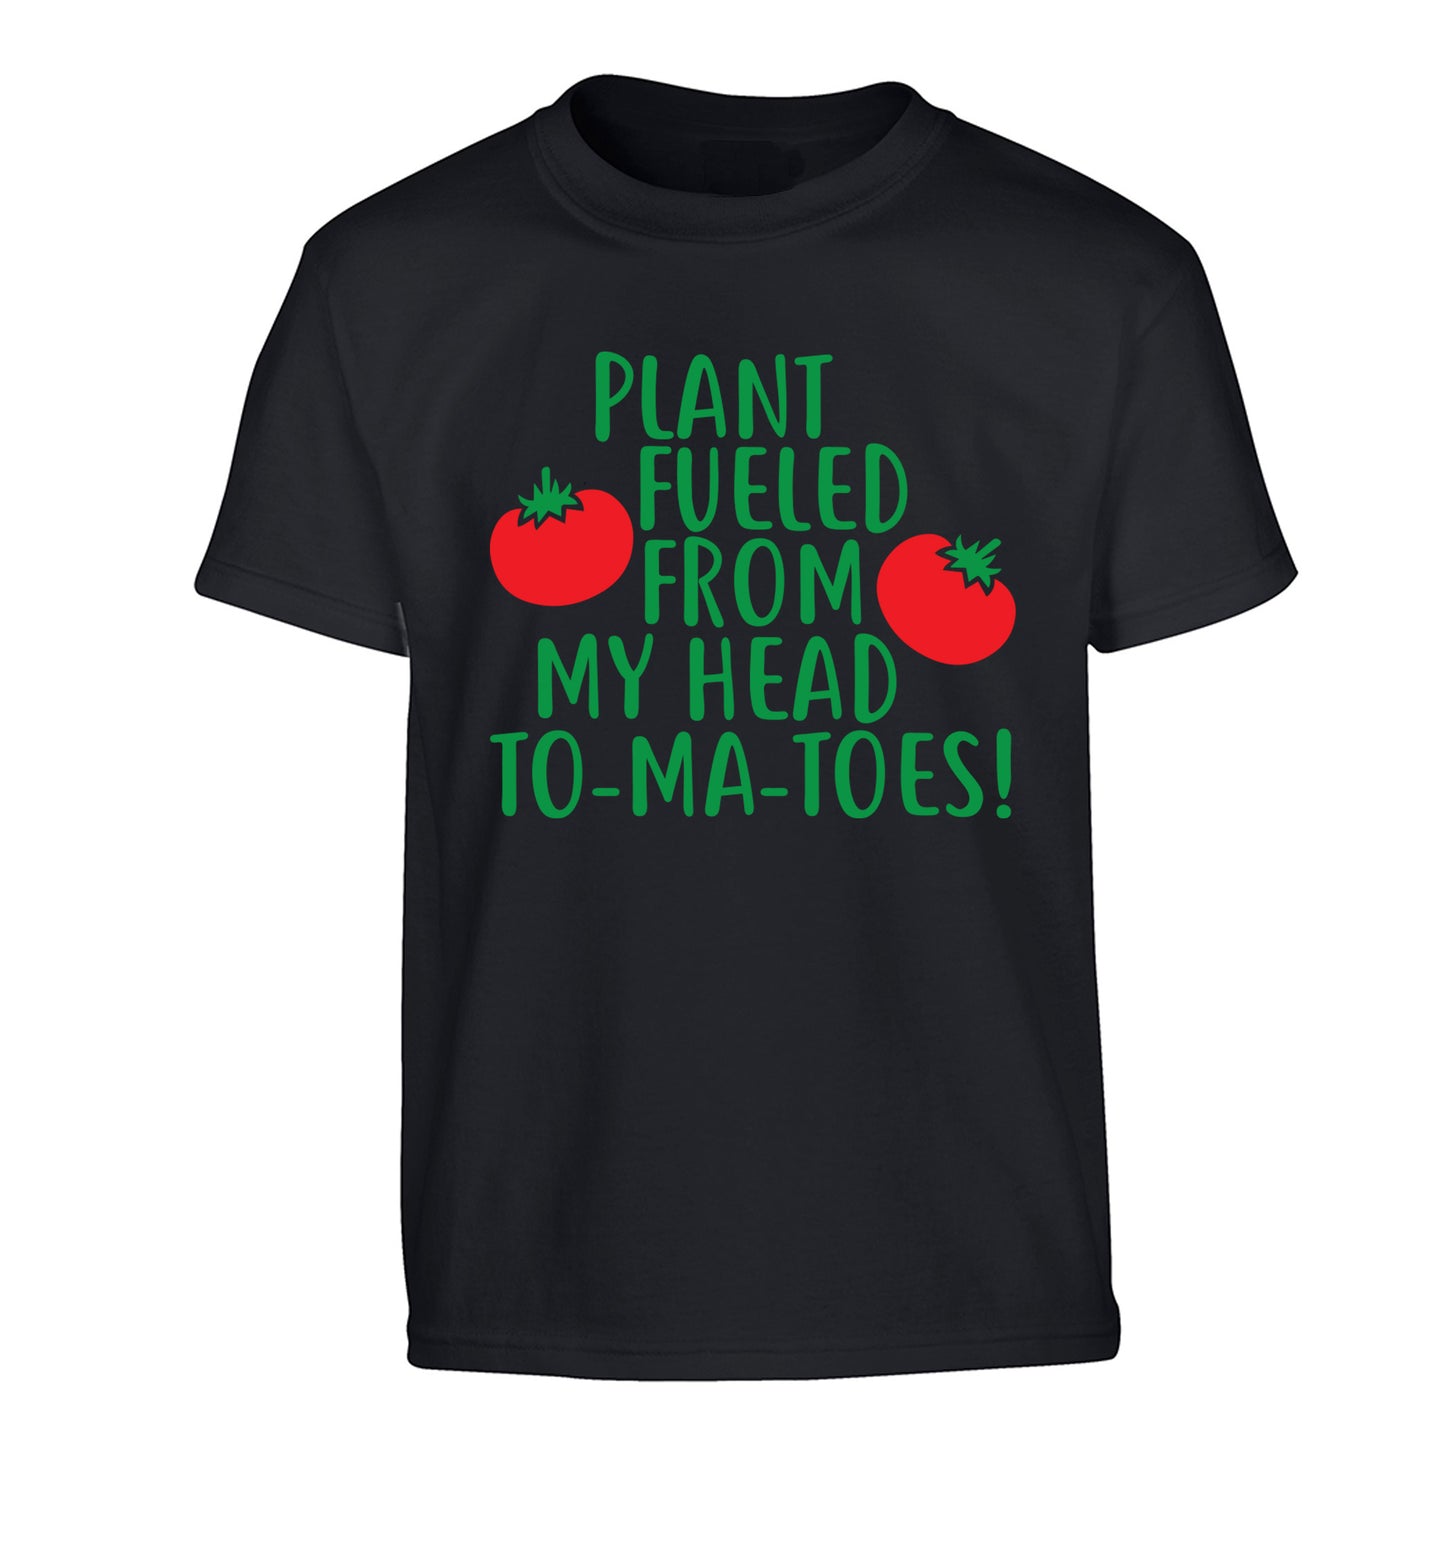 Plant fueled from my head to-ma-toes Children's black Tshirt 12-14 Years